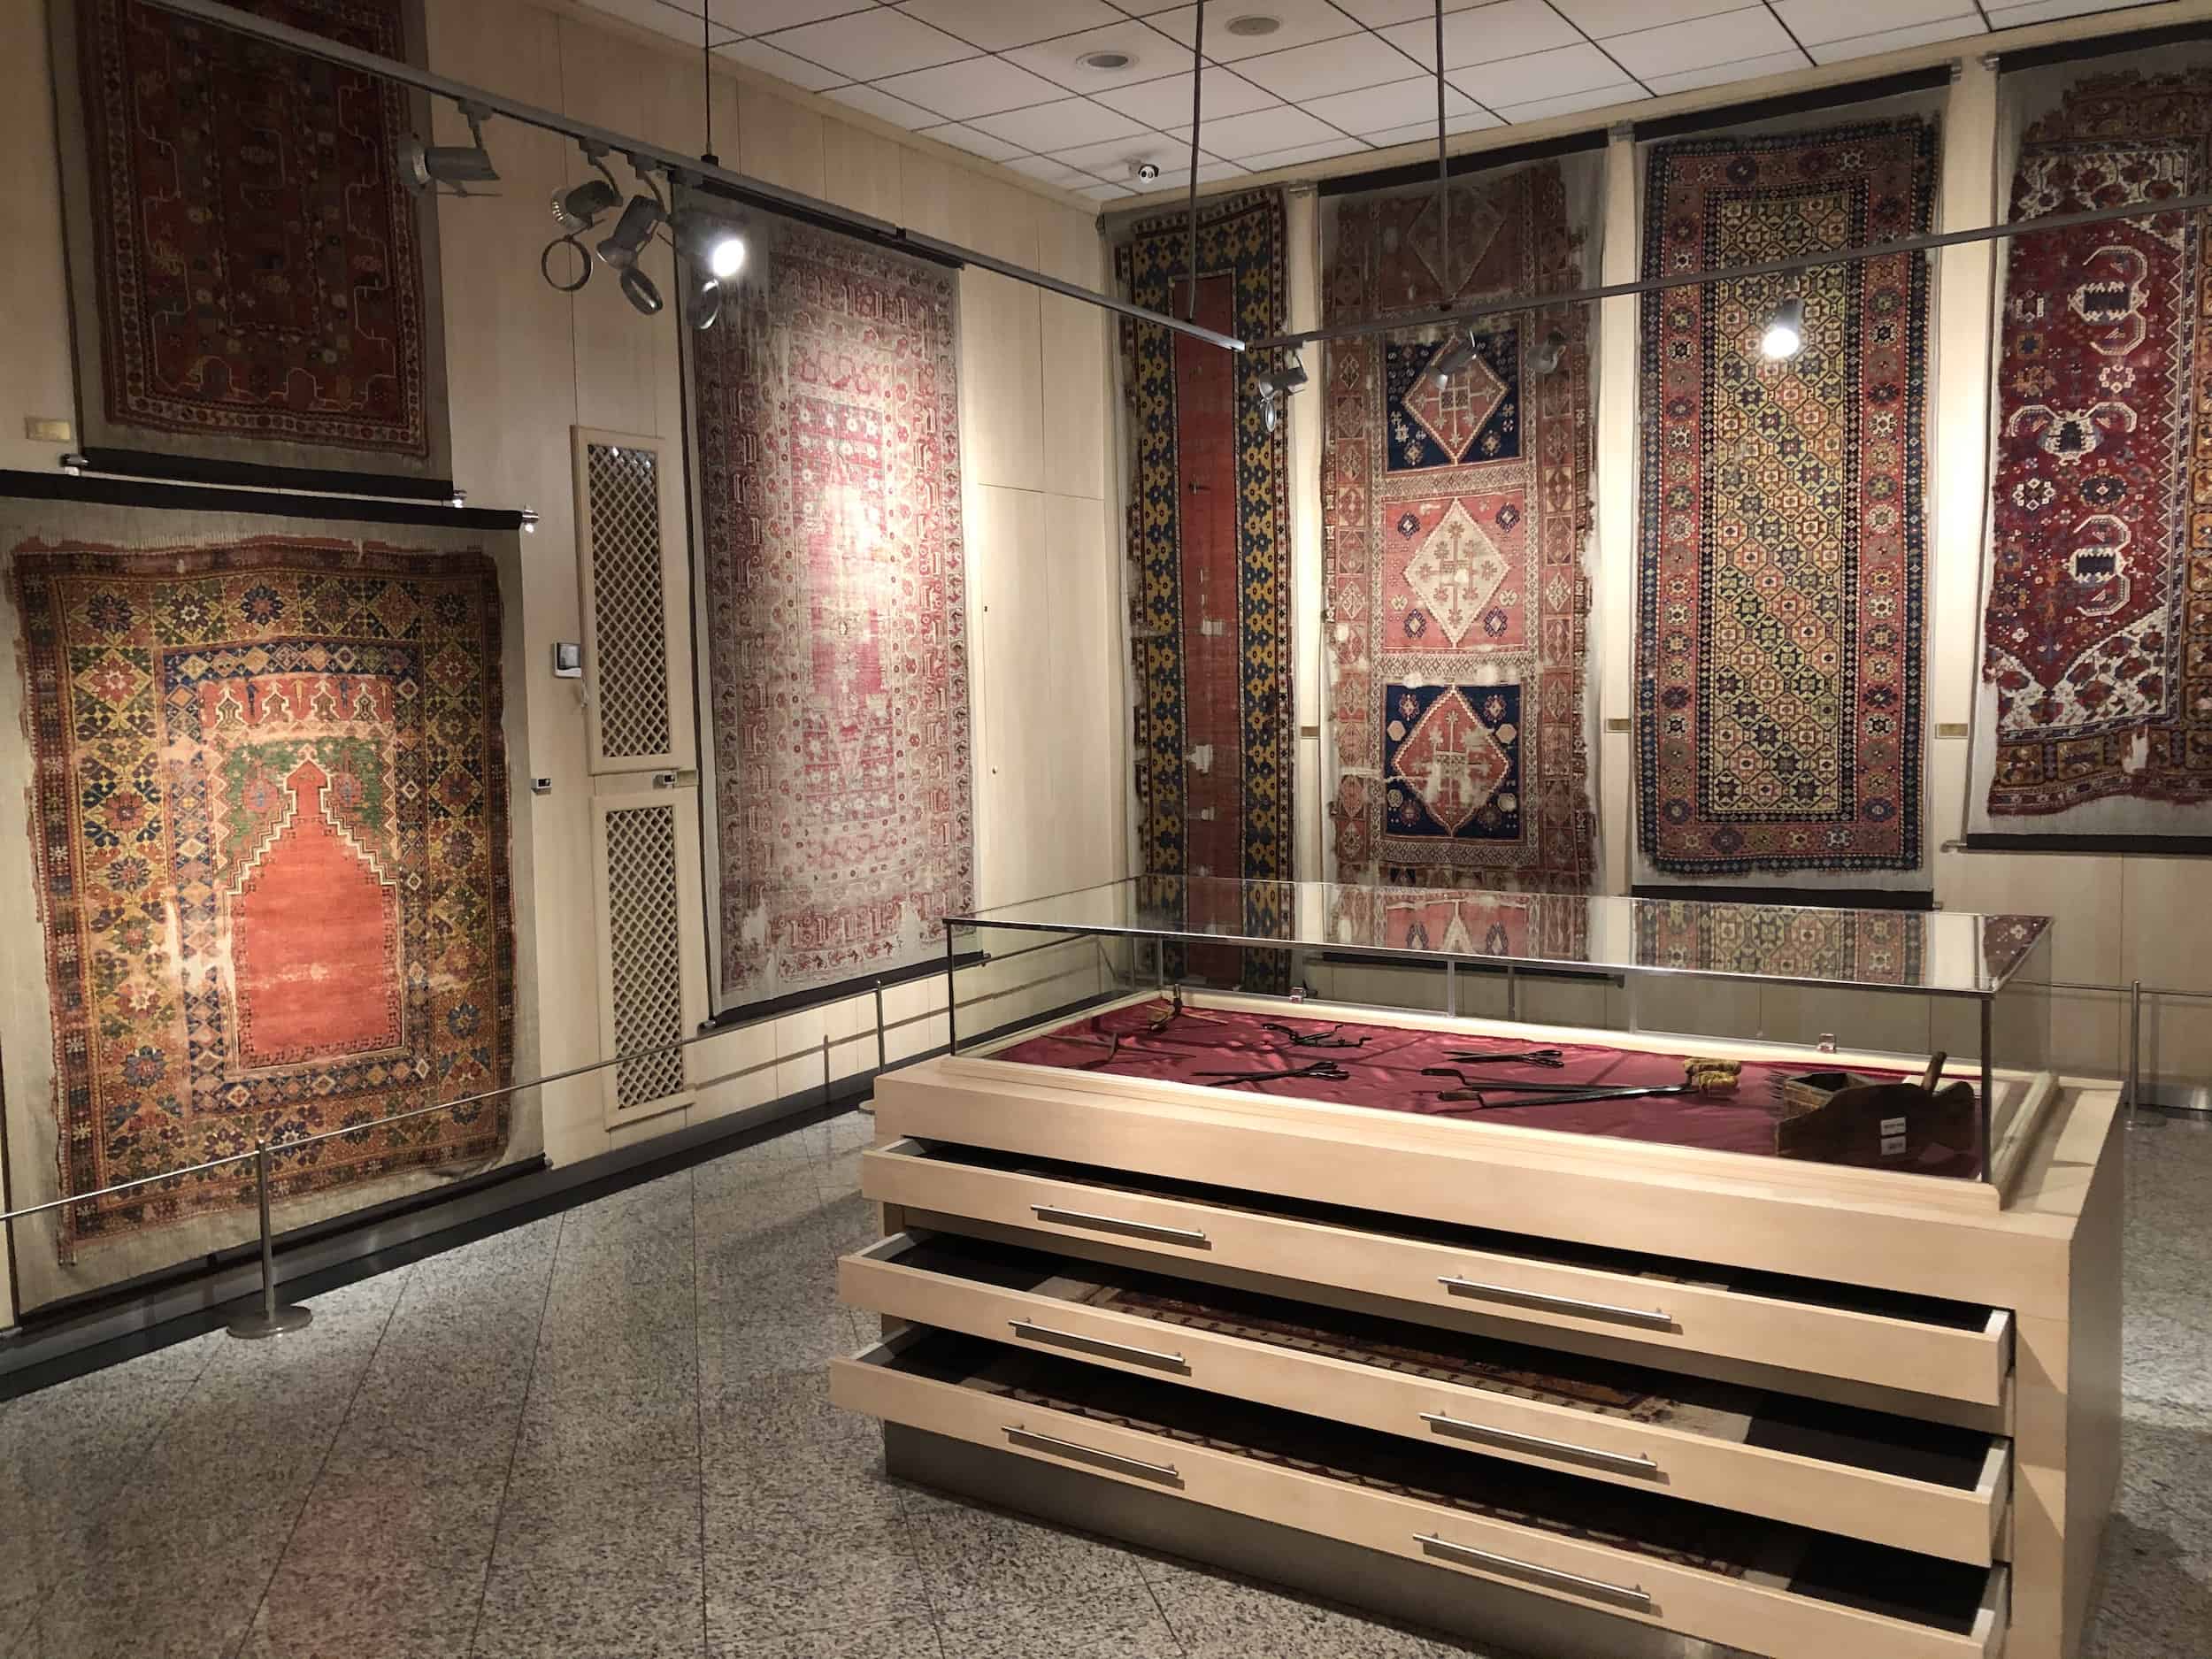 Carpets at the Foundation Works Museum in Ankara, Turkey